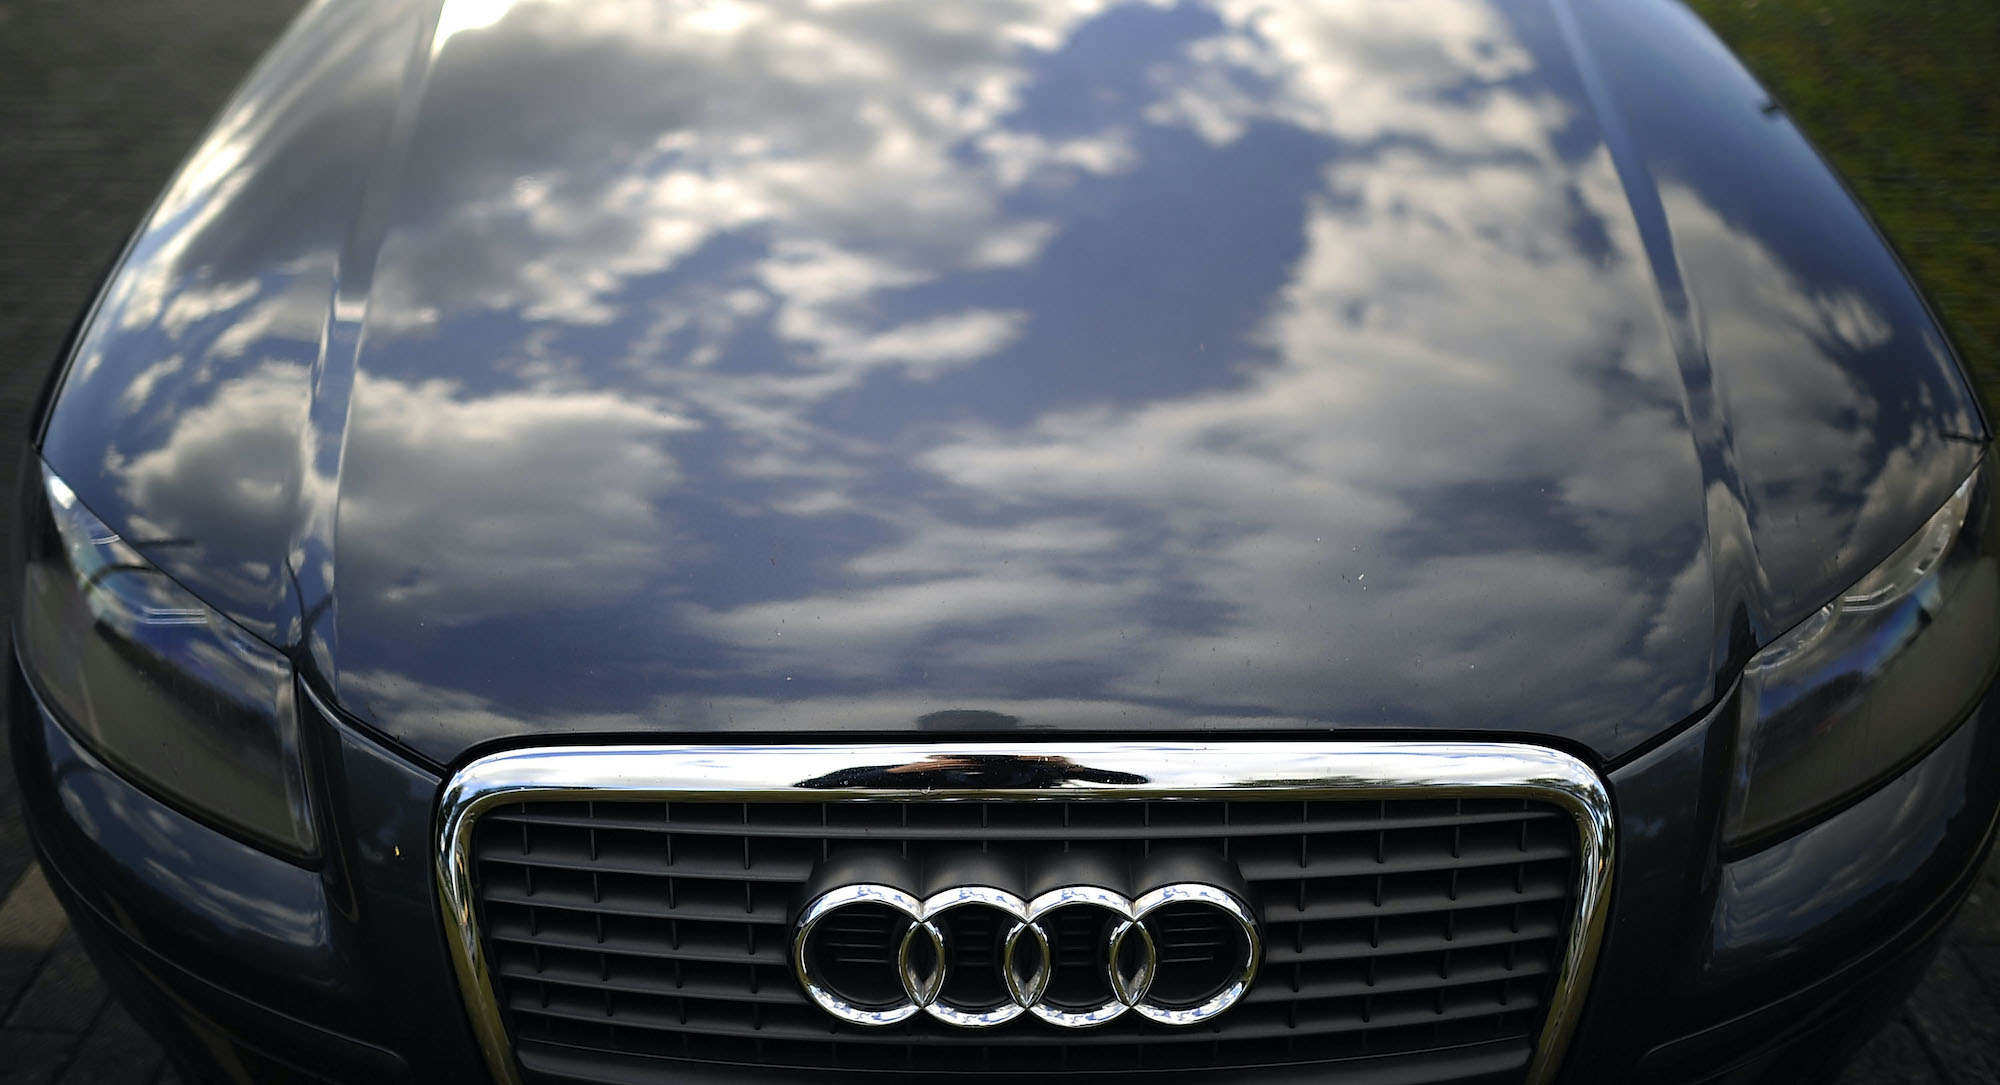 Clouds reflected on the hood of a parked Audi A3